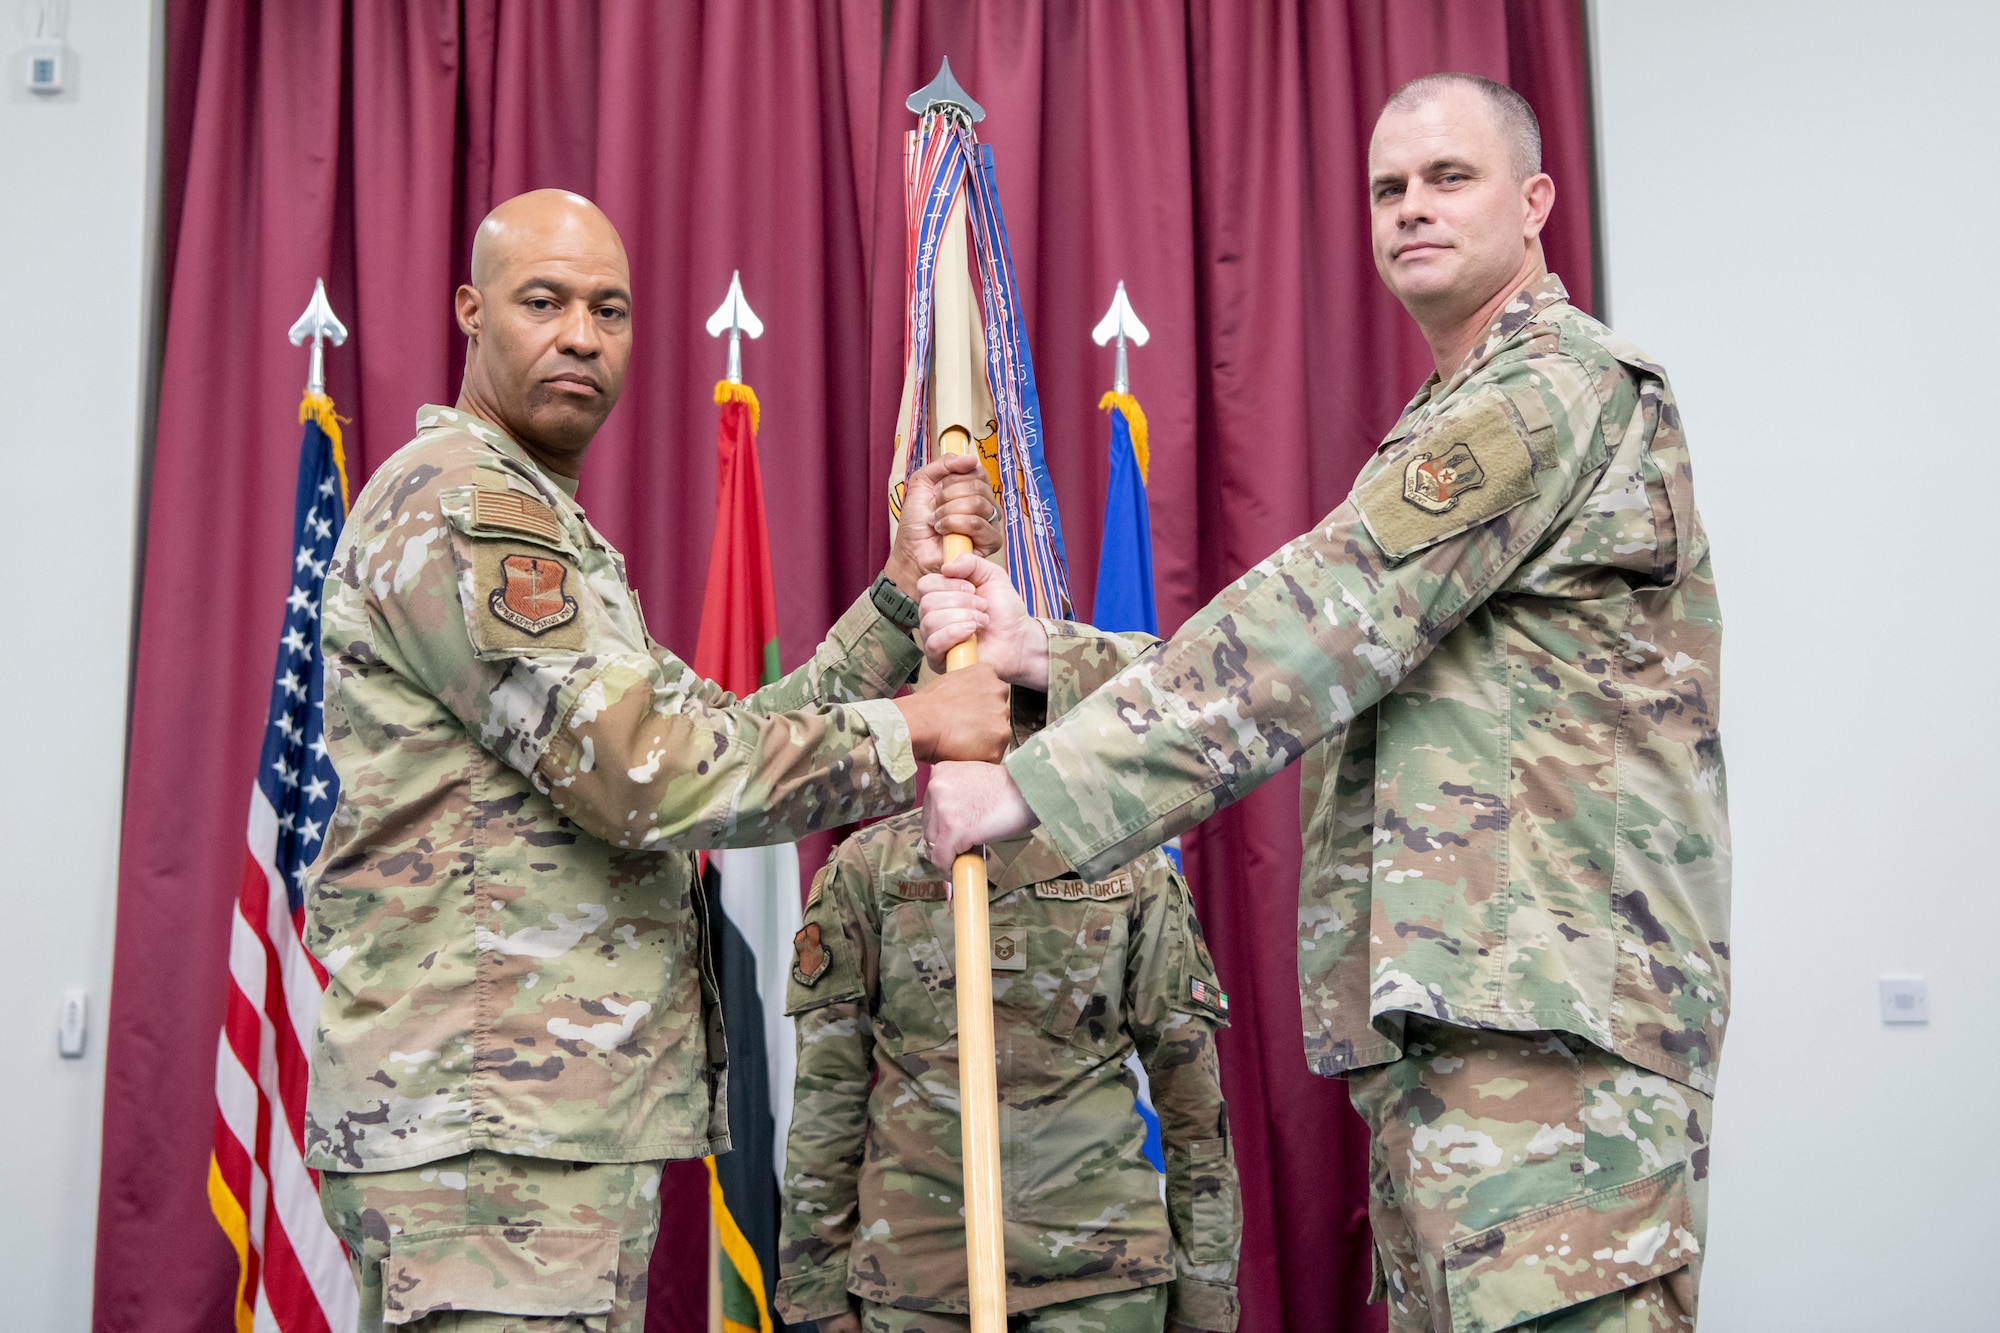 U.S. Air Force Command Chief Master Sgt. Chief Christopher Murphy, command chief of the 380th Air Expeditionary Wing, relinquishes responsibility of the 380th AEW to Brig. Gen. Terence Taylor, outgoing commander of the 380th Air Expeditionary Wing, during a combined change of command and change of responsibility ceremony at an undisclosed location within the U.S. Central Command area of responsibility, April 1, 2024.